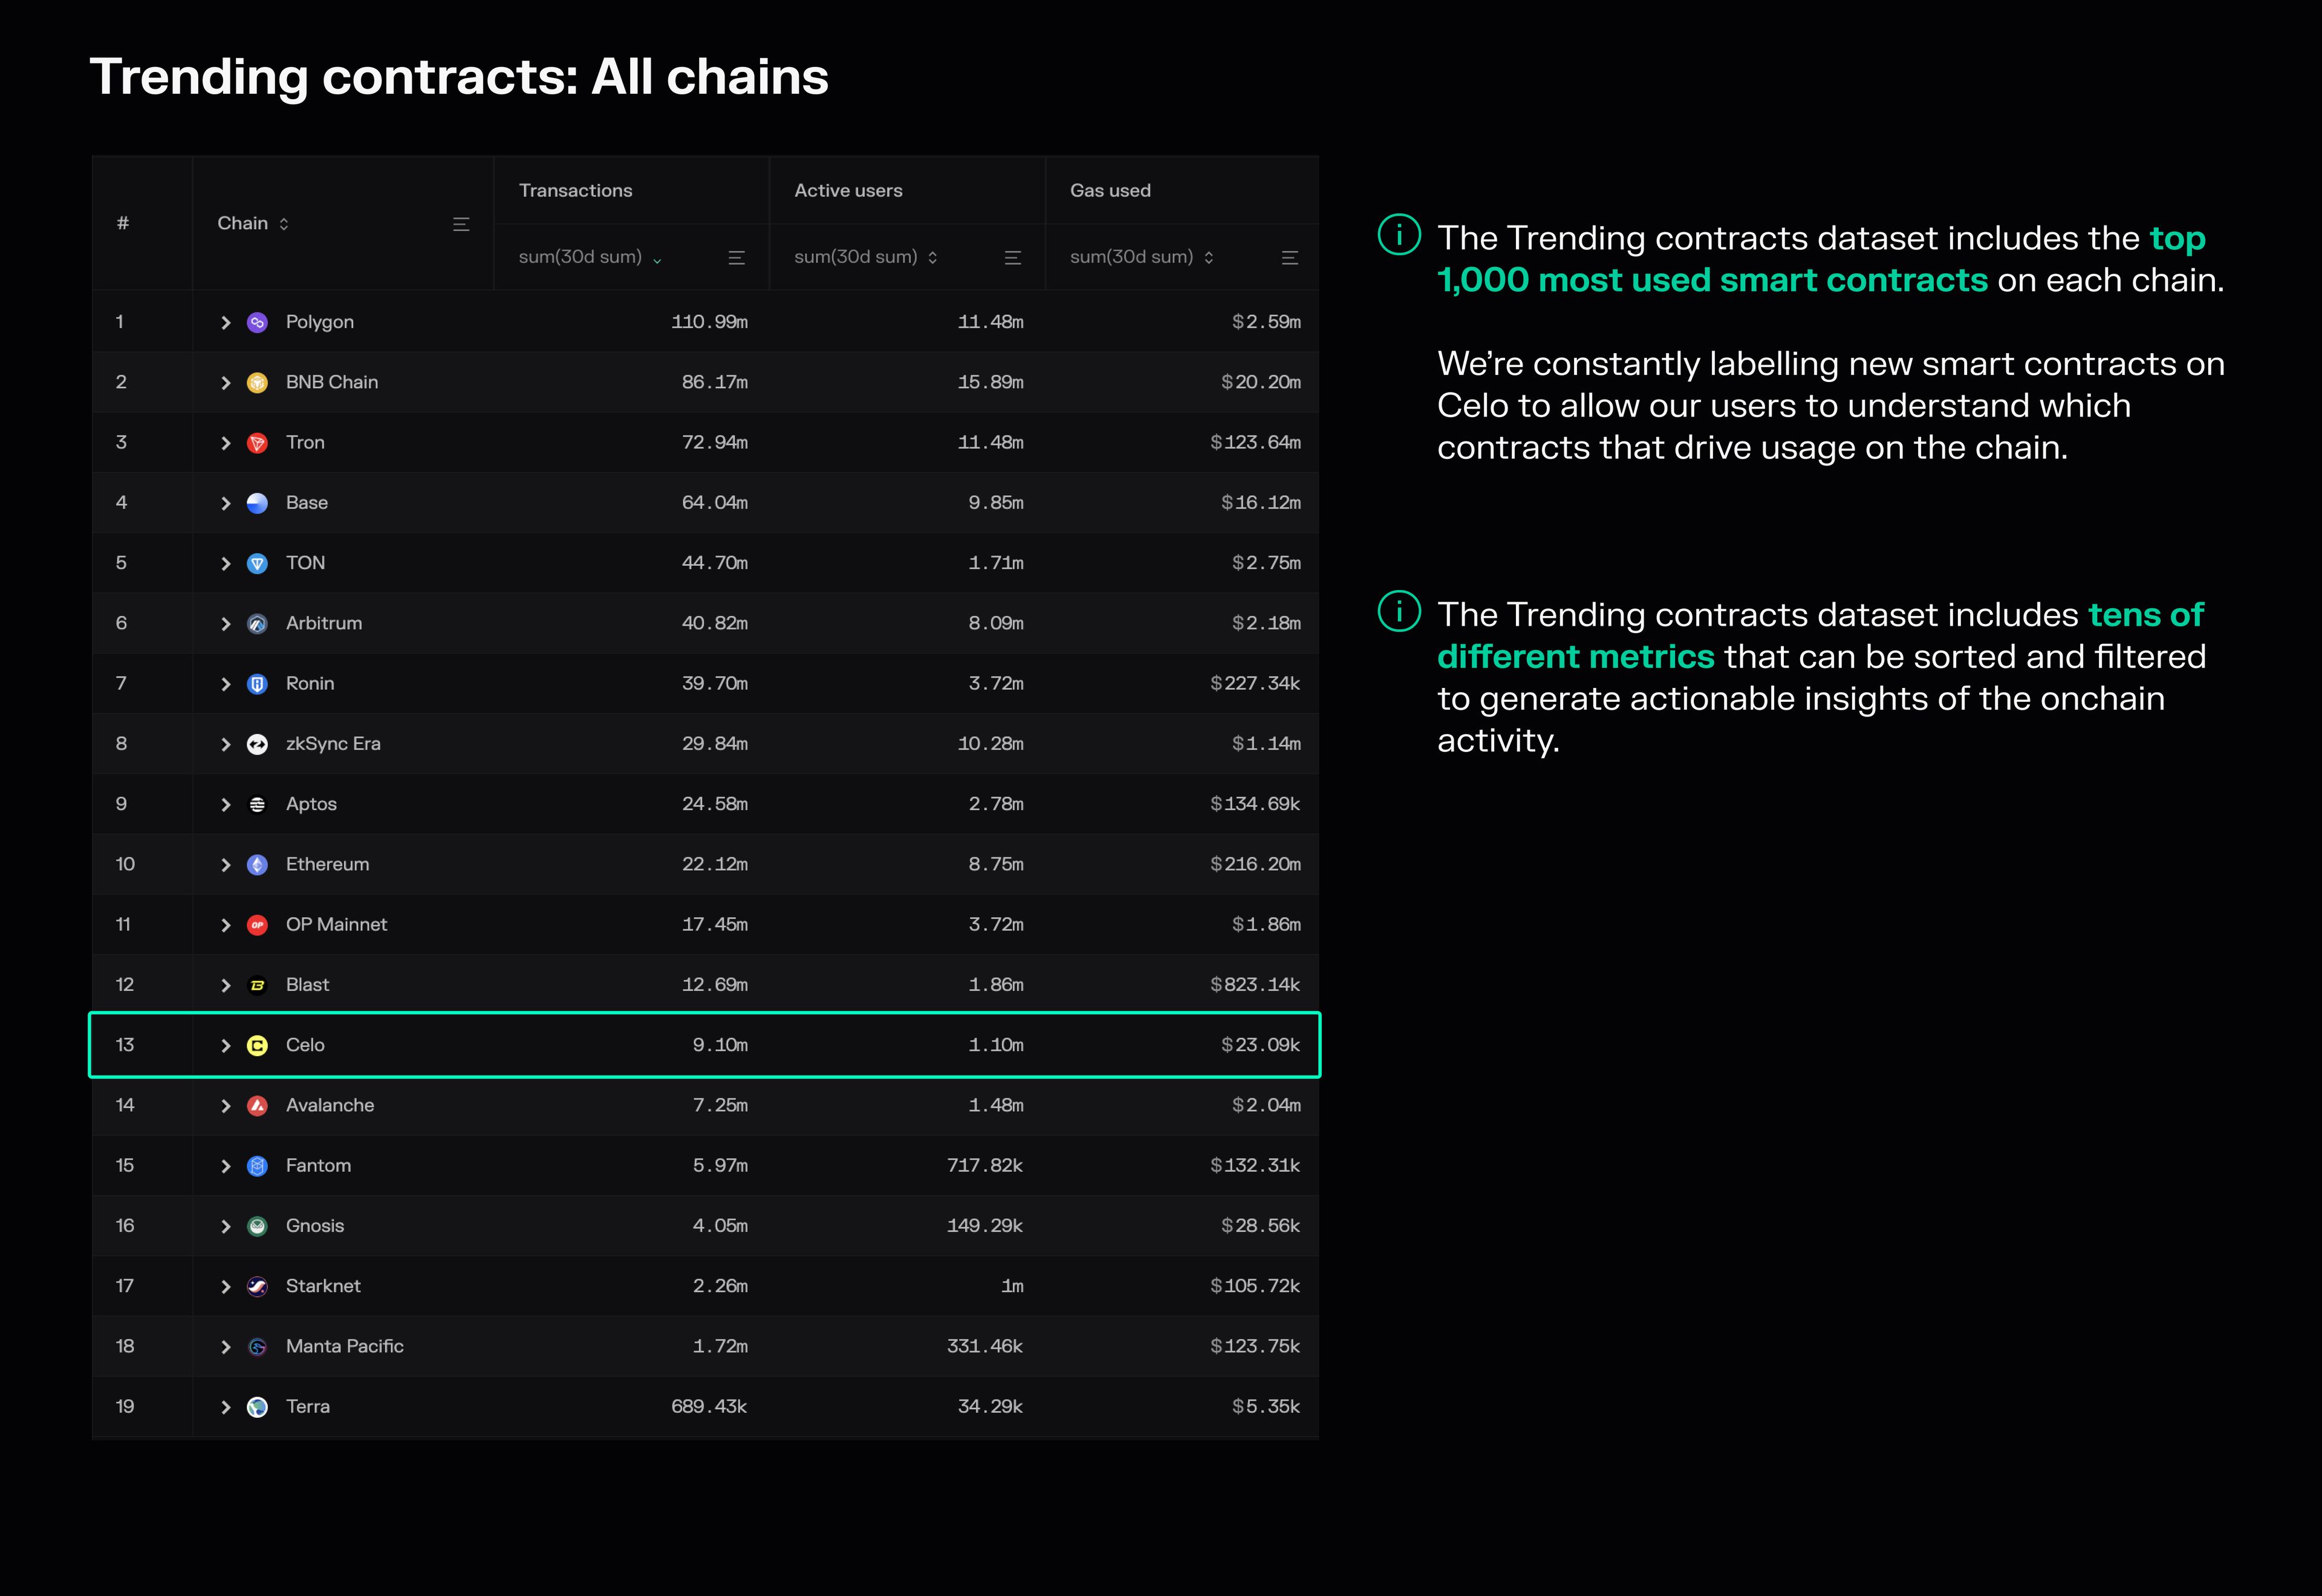 A chain comparison view built using the Trending contracts dashboard.